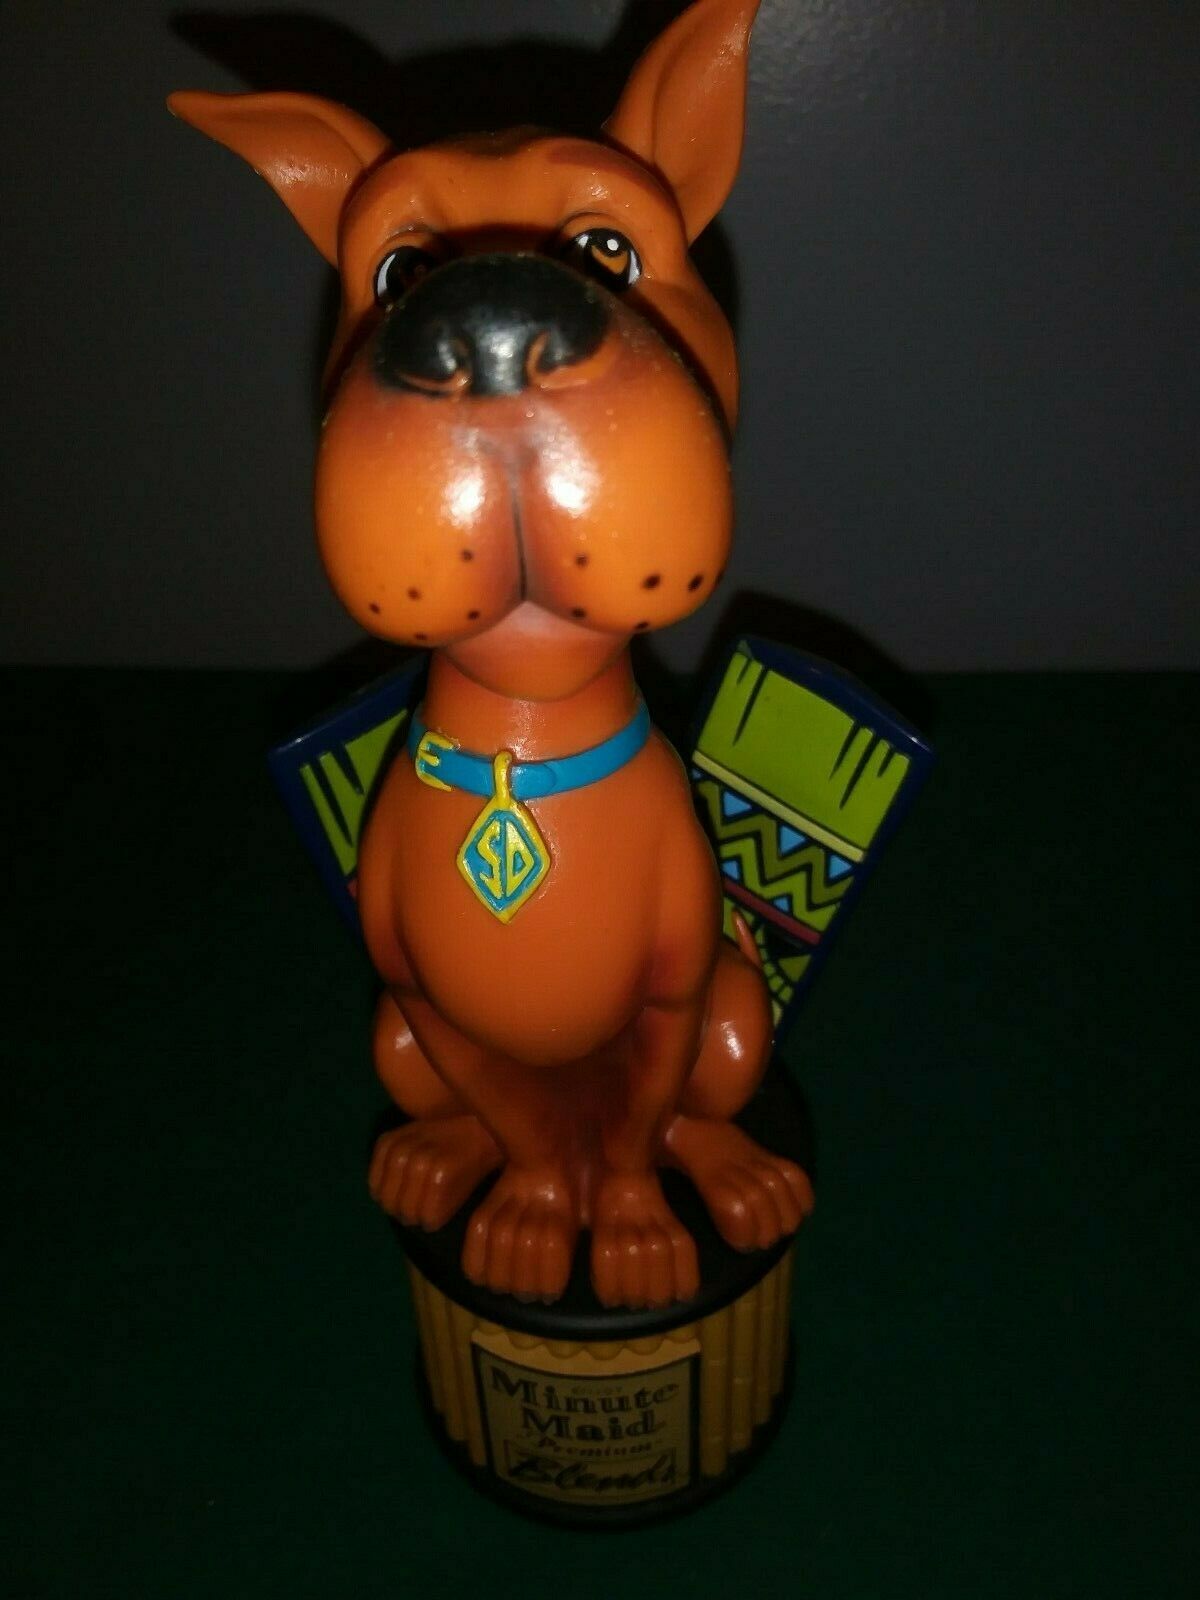 Scooby Doo Minute Maid 2002 Bobblehead 8" Tall - Perfect Condition